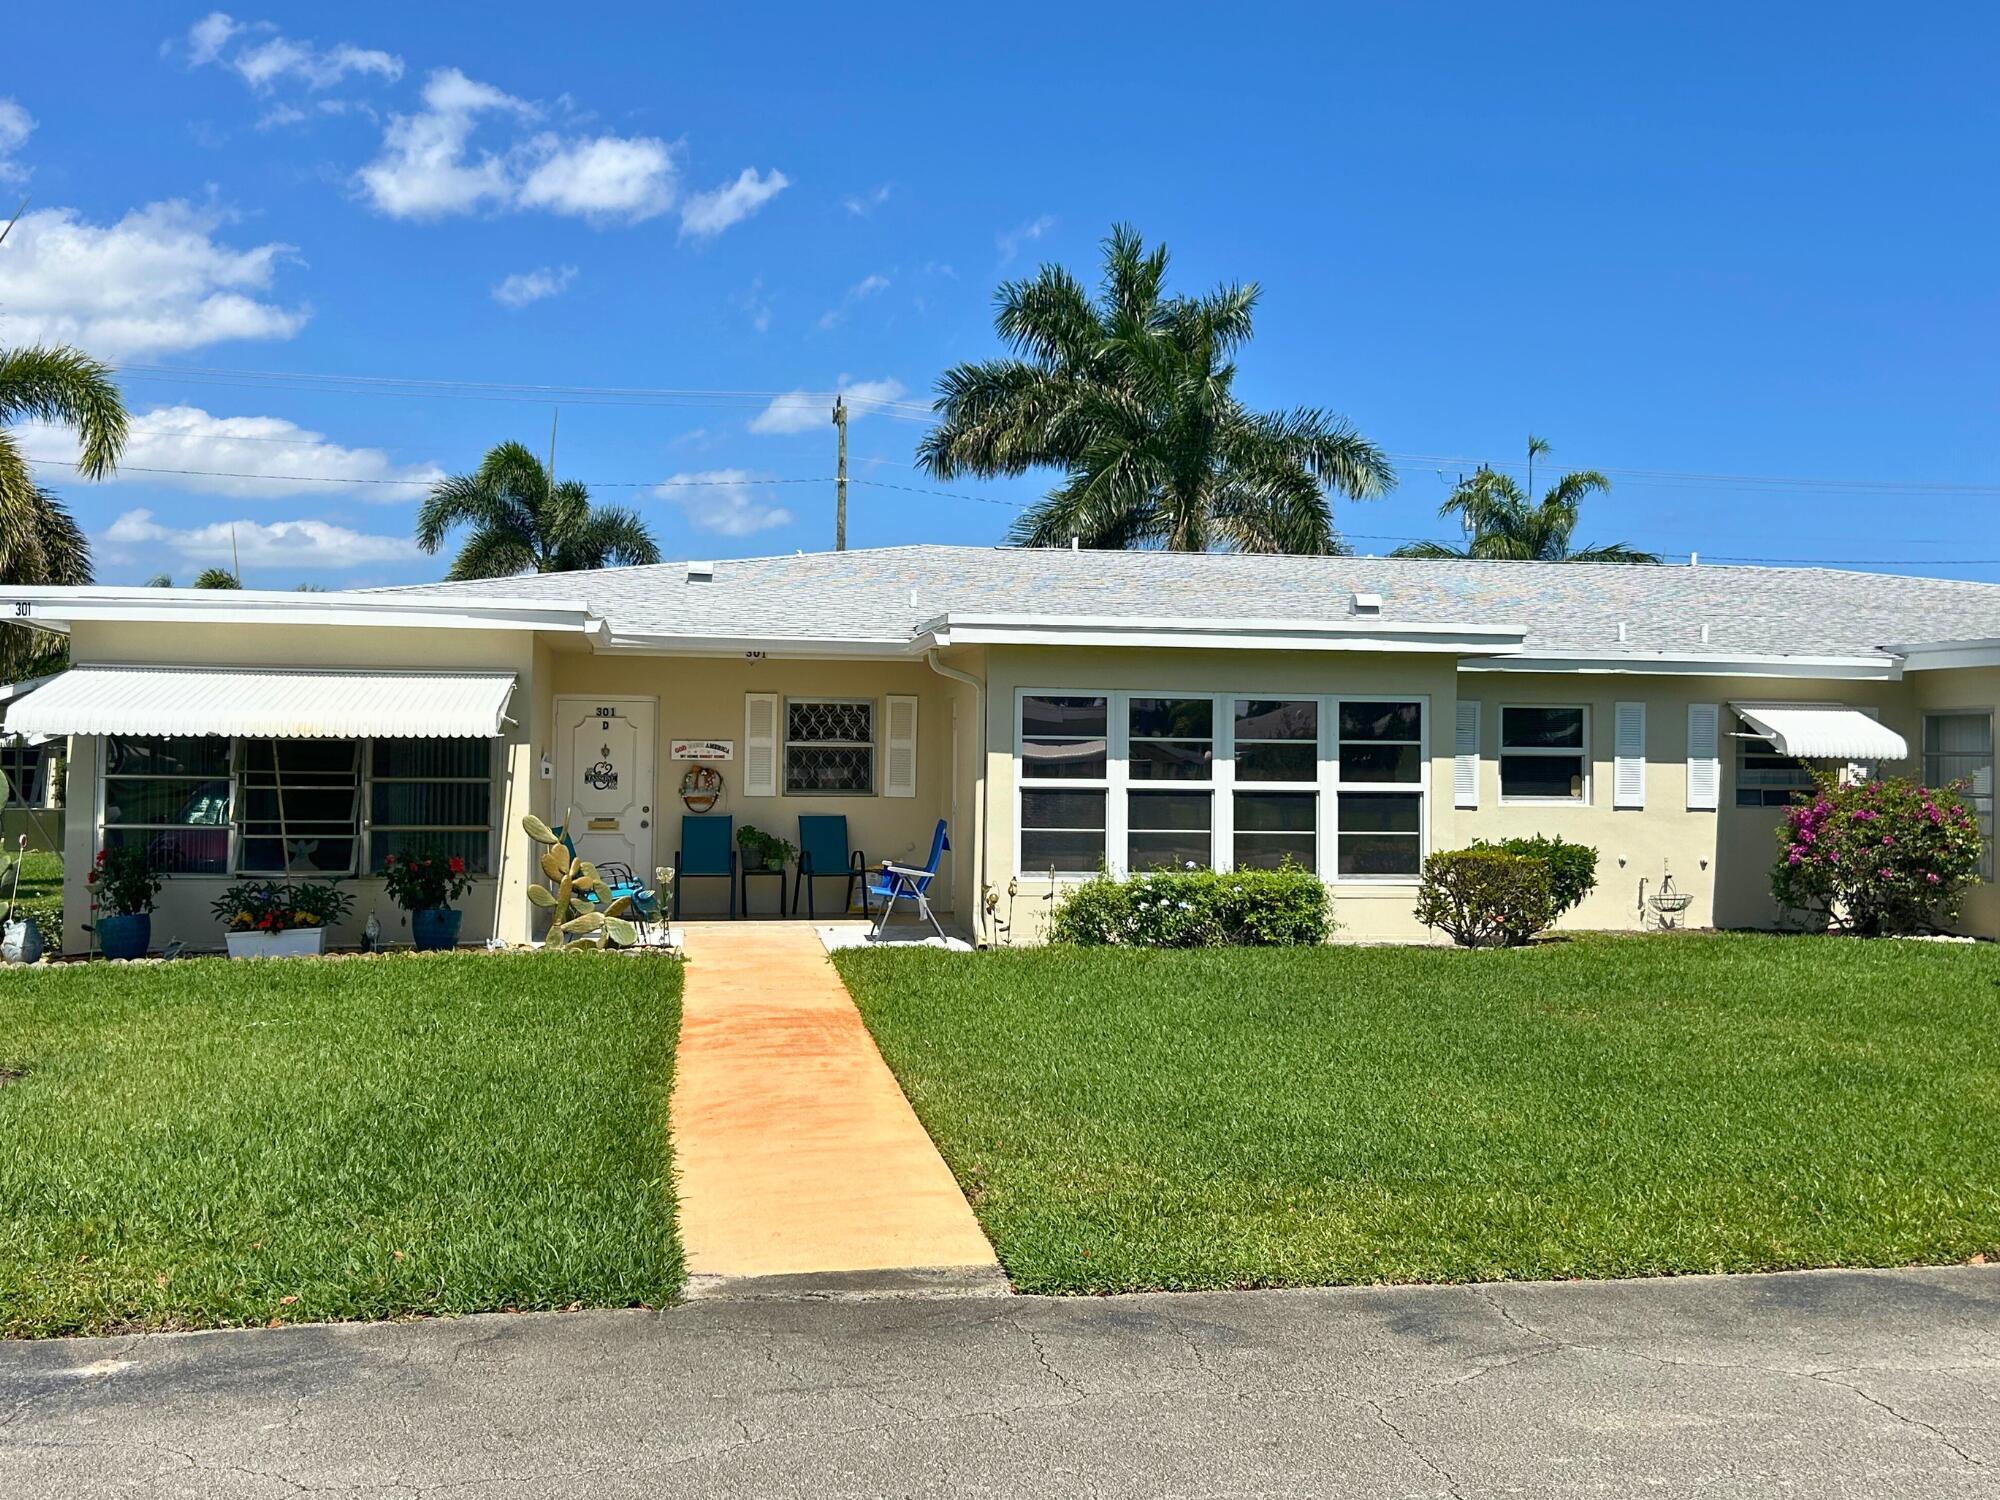 Discover a hidden gem for those 55 and older in Boynton Beach, Florida. This spacious 2-bedroom, 2-bathroom residence offers ample space for both full-time living and seasonal getaways. The vibrant community boasts a heated pool, shuffleboard courts, and a variety of activities to enrich your lifestyle. The HOA covers a comprehensive package including cable, internet, lawn care, and exterior maintenance, along with exterior insurance, reserve funds, and laundry facilities. Surrounded by lush, beautifully maintained landscaping, this community truly feels like a slice of paradise.